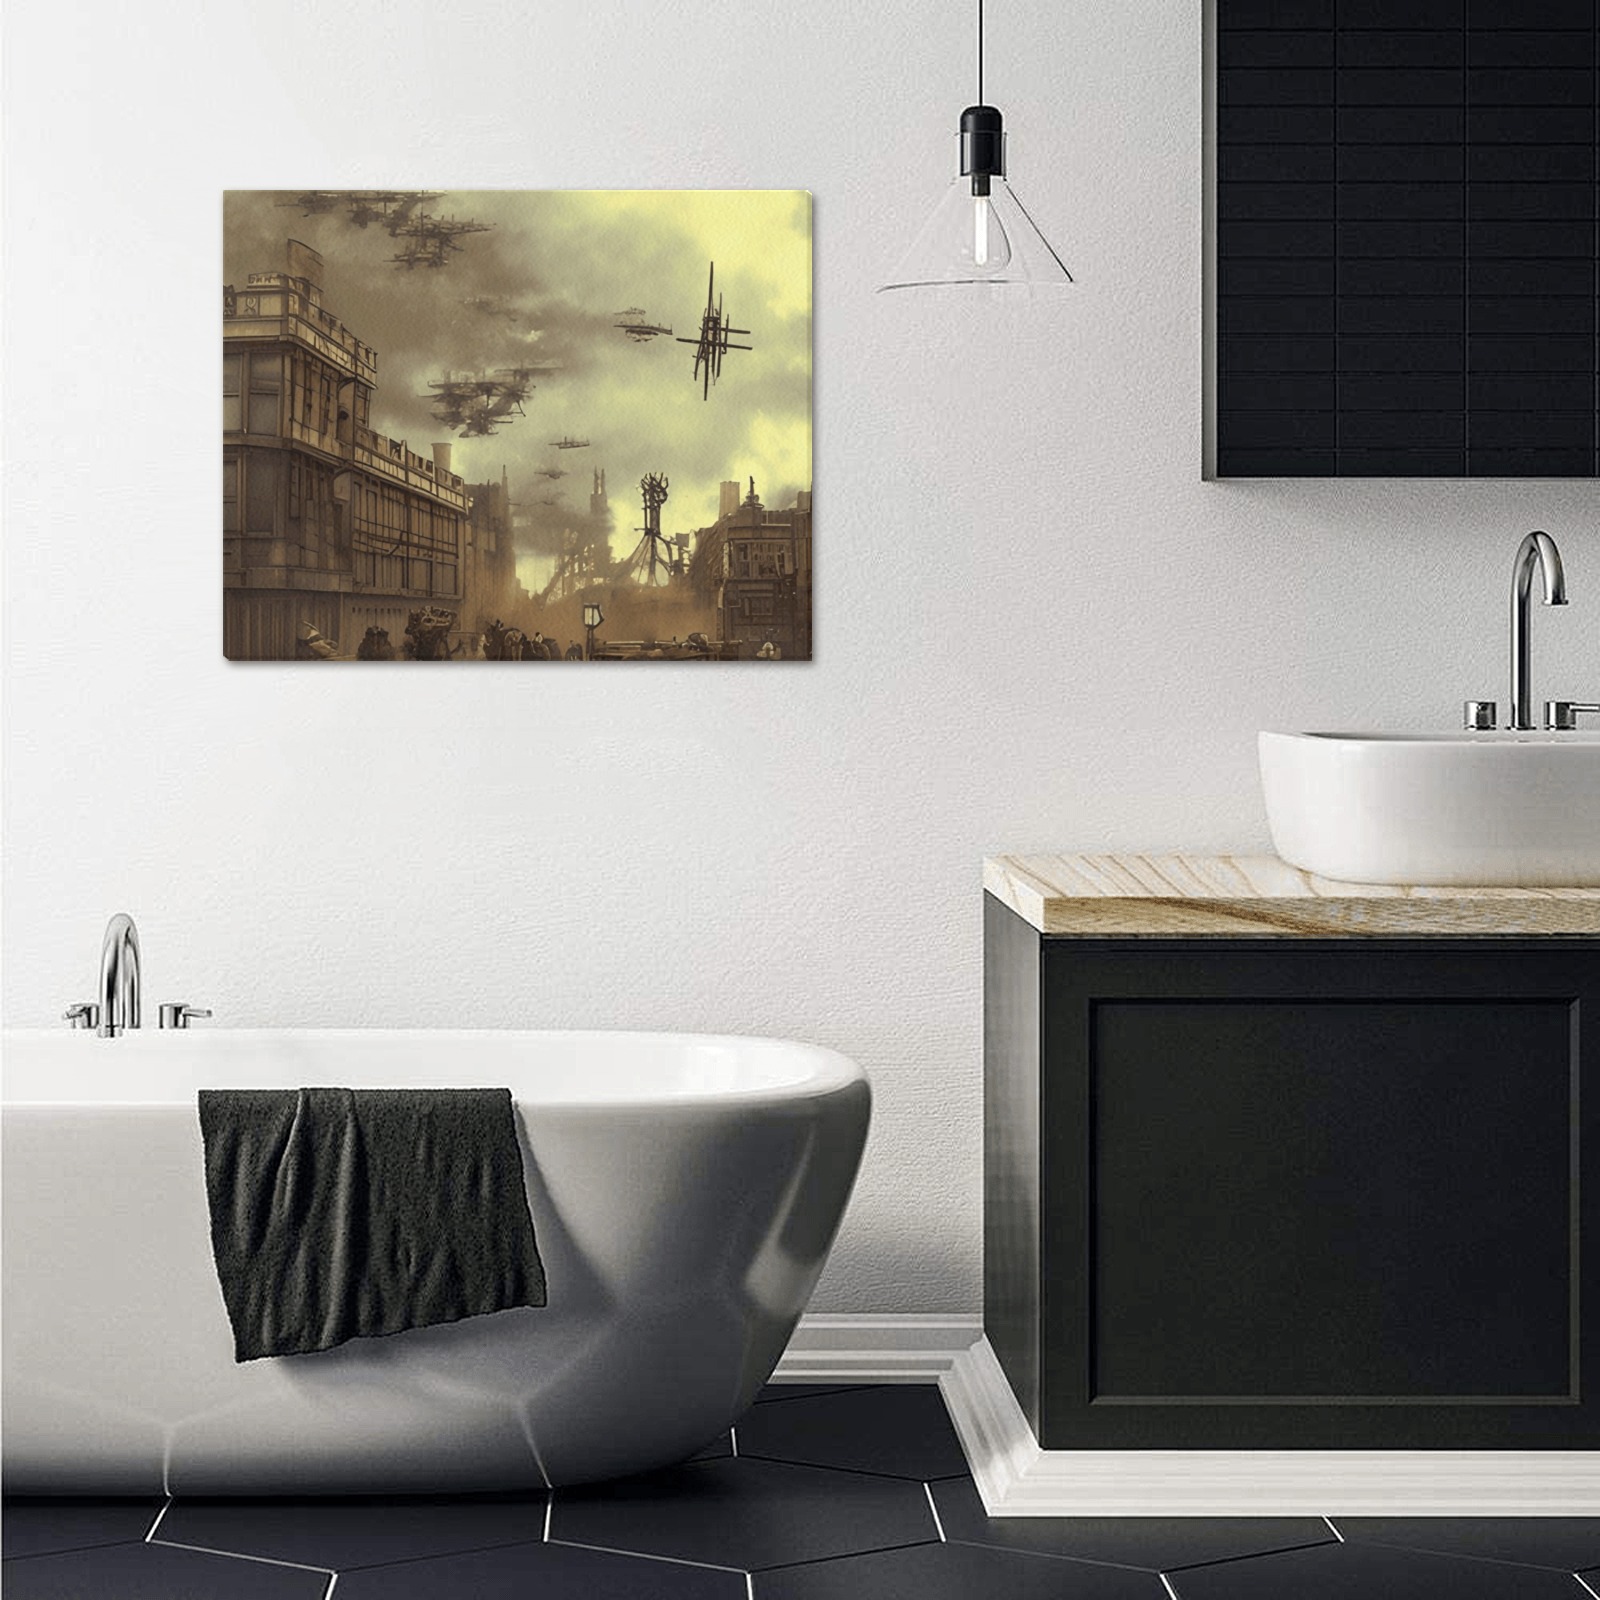 BATTLE OVER LONDON 6 Upgraded Canvas Print 20"x16"